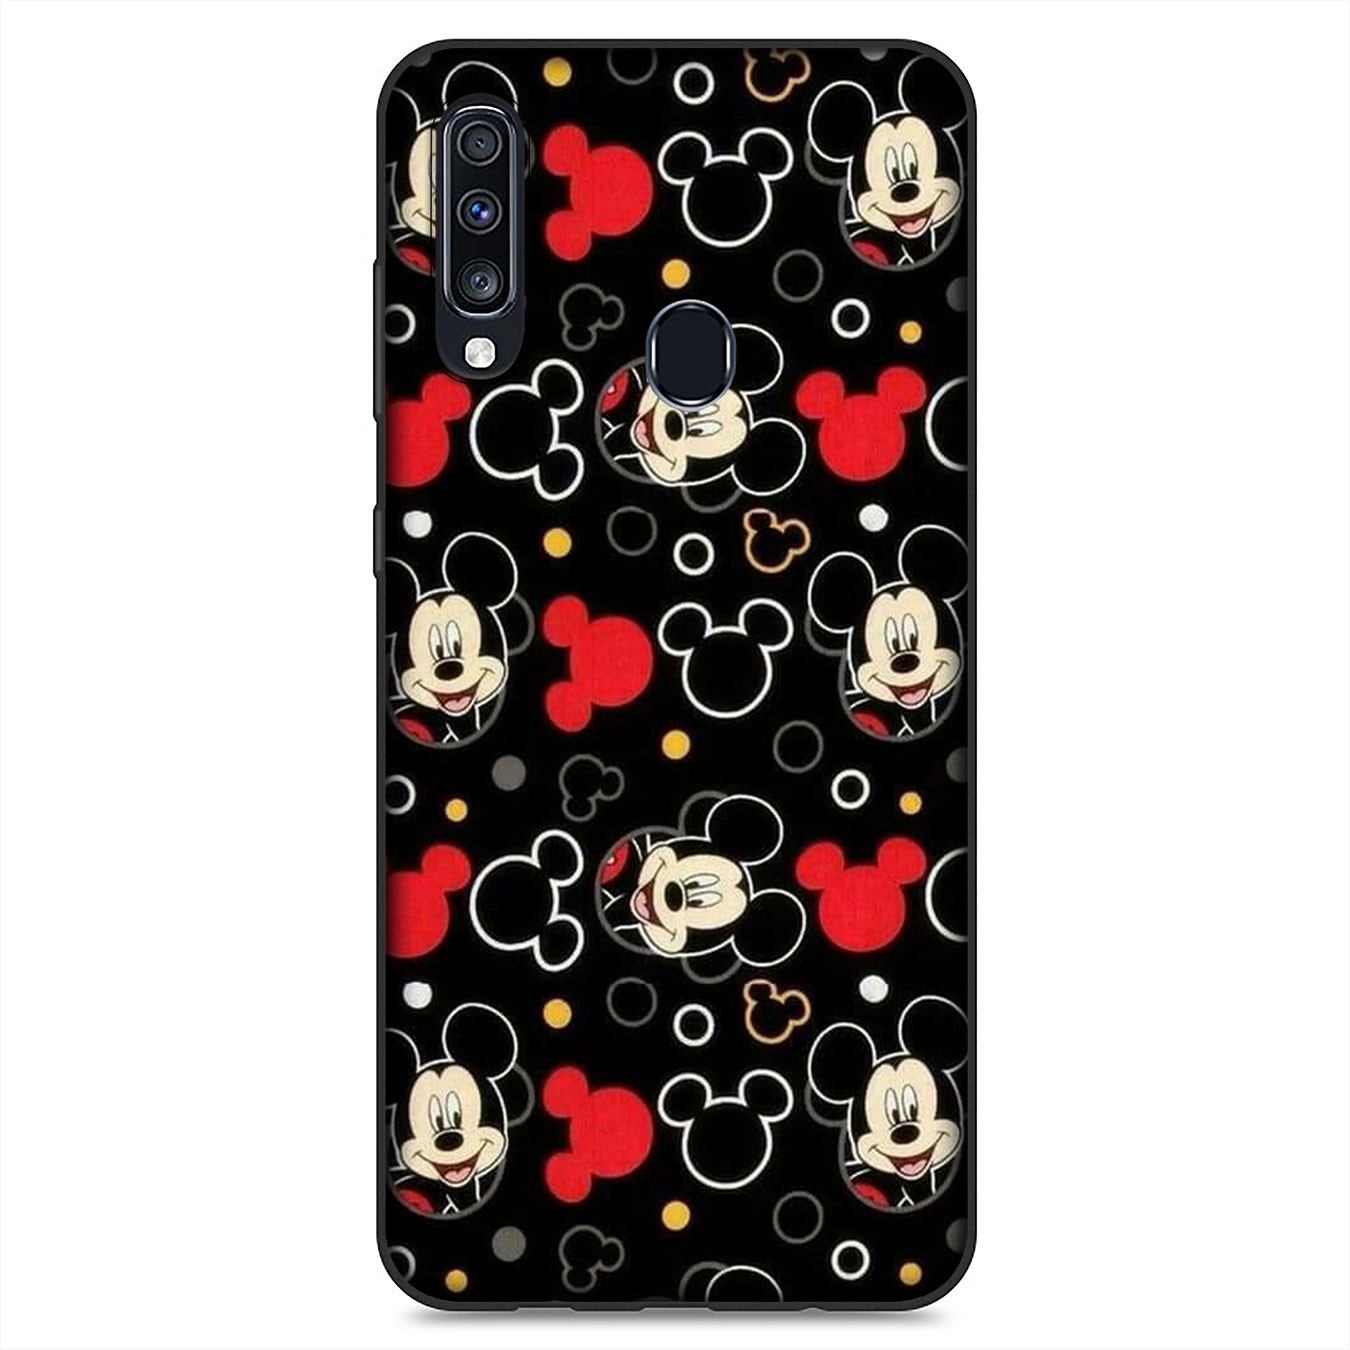 Samsung Galaxy S21 Ultra S8 Plus F62 M62 A2 A32 A52 A72 S21+ S8+ S21Plus Casing Soft Silicone Phone Case Mickey Mouse Cartoon Cover